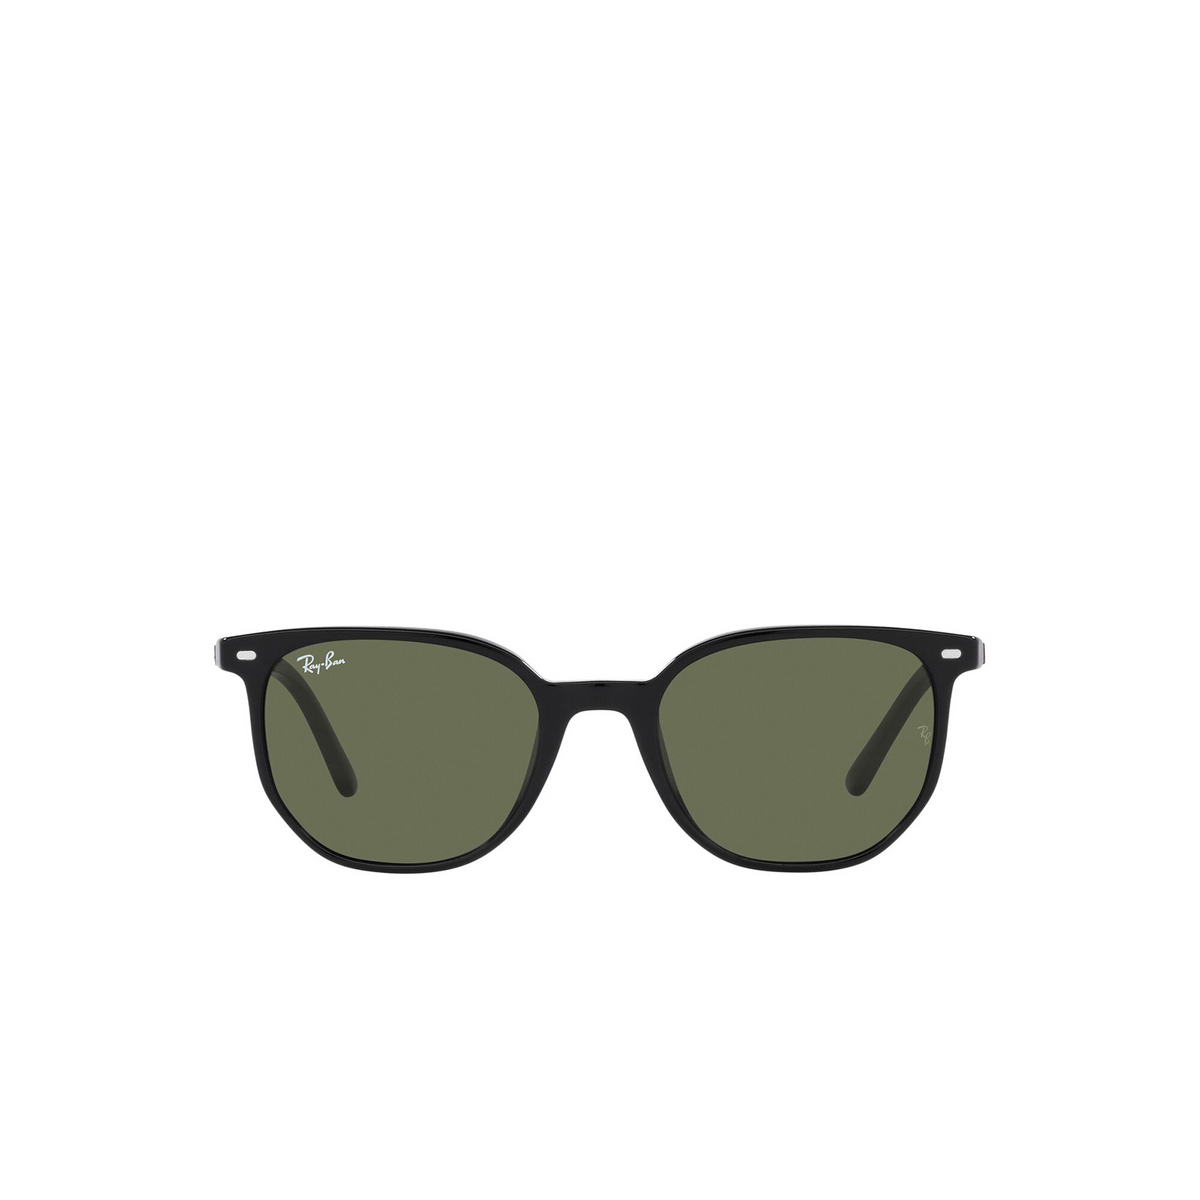 Ray-Ban® Square Sunglasses: Elliot RB2197 color Black 901/31 - front view.